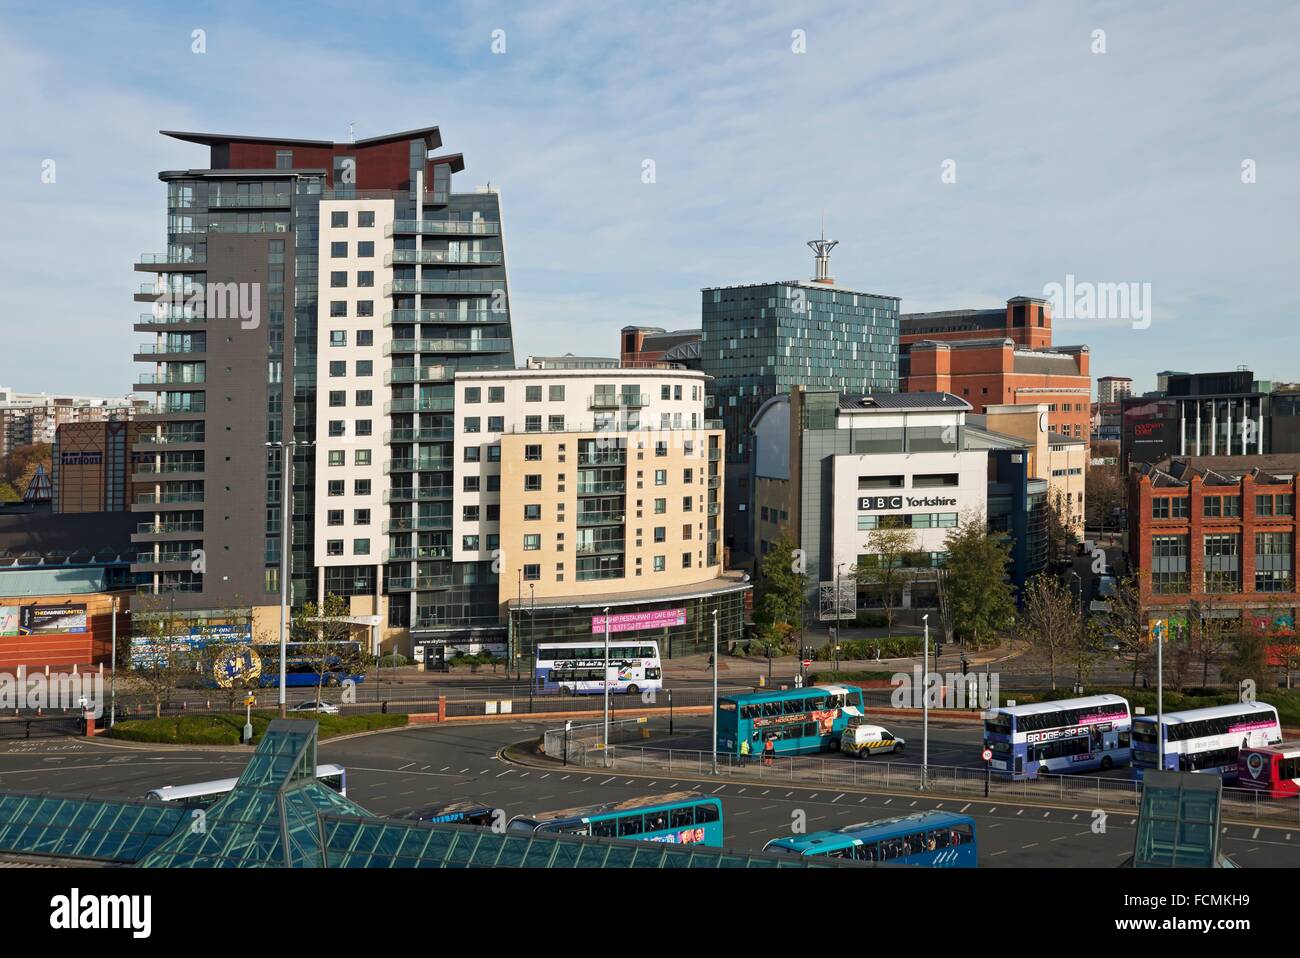 Tower blocks and BBC Yorkshire St Peter´s Square Leeds West Yorkshire England UK United Kingdom GB Great Britain. Stock Photo